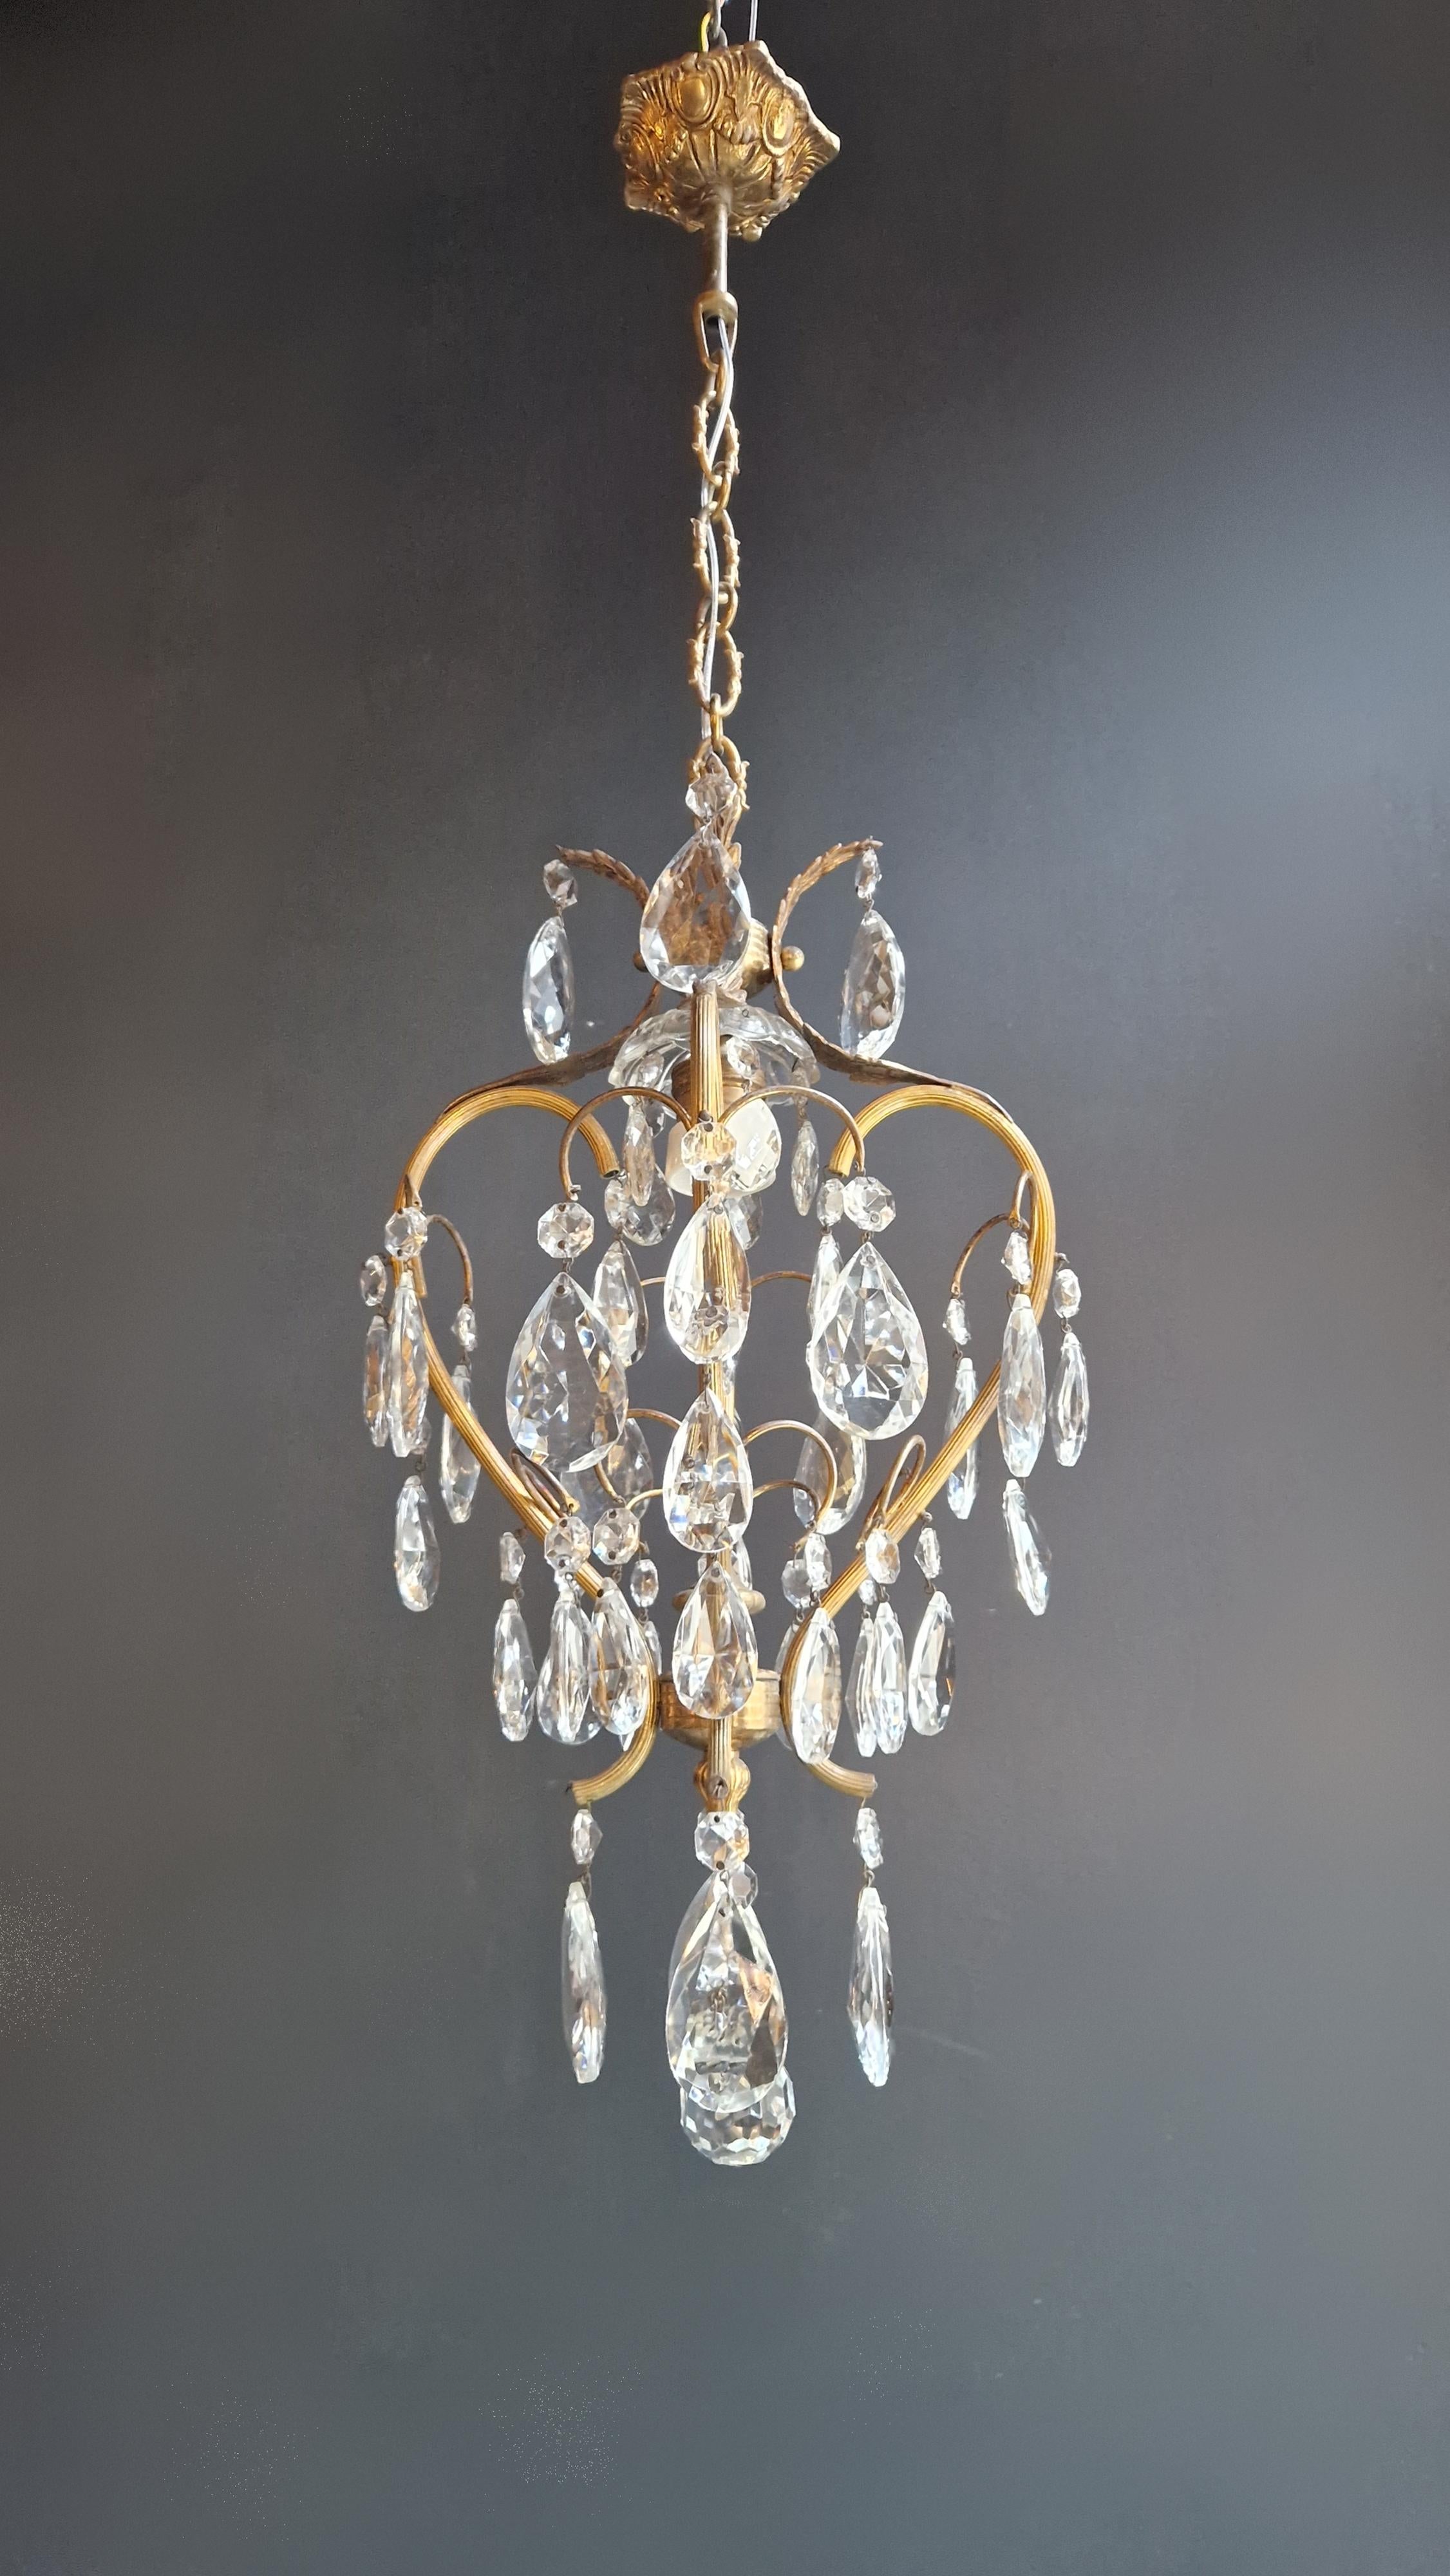 Introducing an exquisitely preserved chandelier from the circa 1940s, meticulously restored to its original glory. The cabling and sockets have been completely renewed, ensuring both safety and functionality. The crystal elements are hand-knotted,